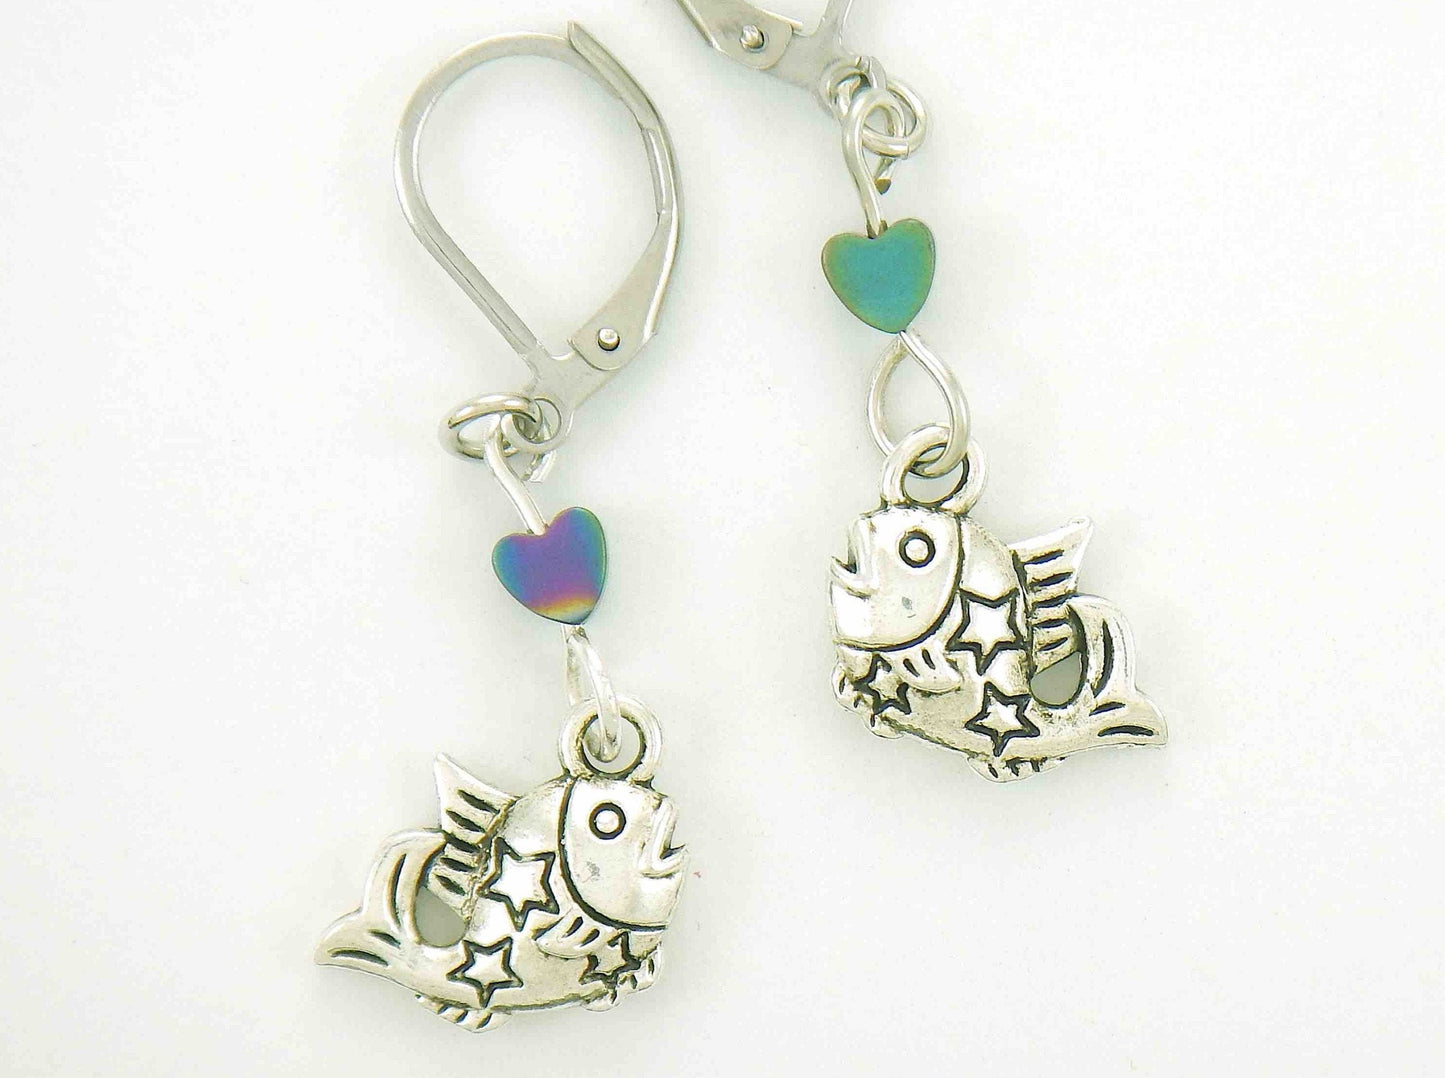 Short earrings with small pewter jumping fish and iridescent hematite hearts, stainless steel lever back hooks